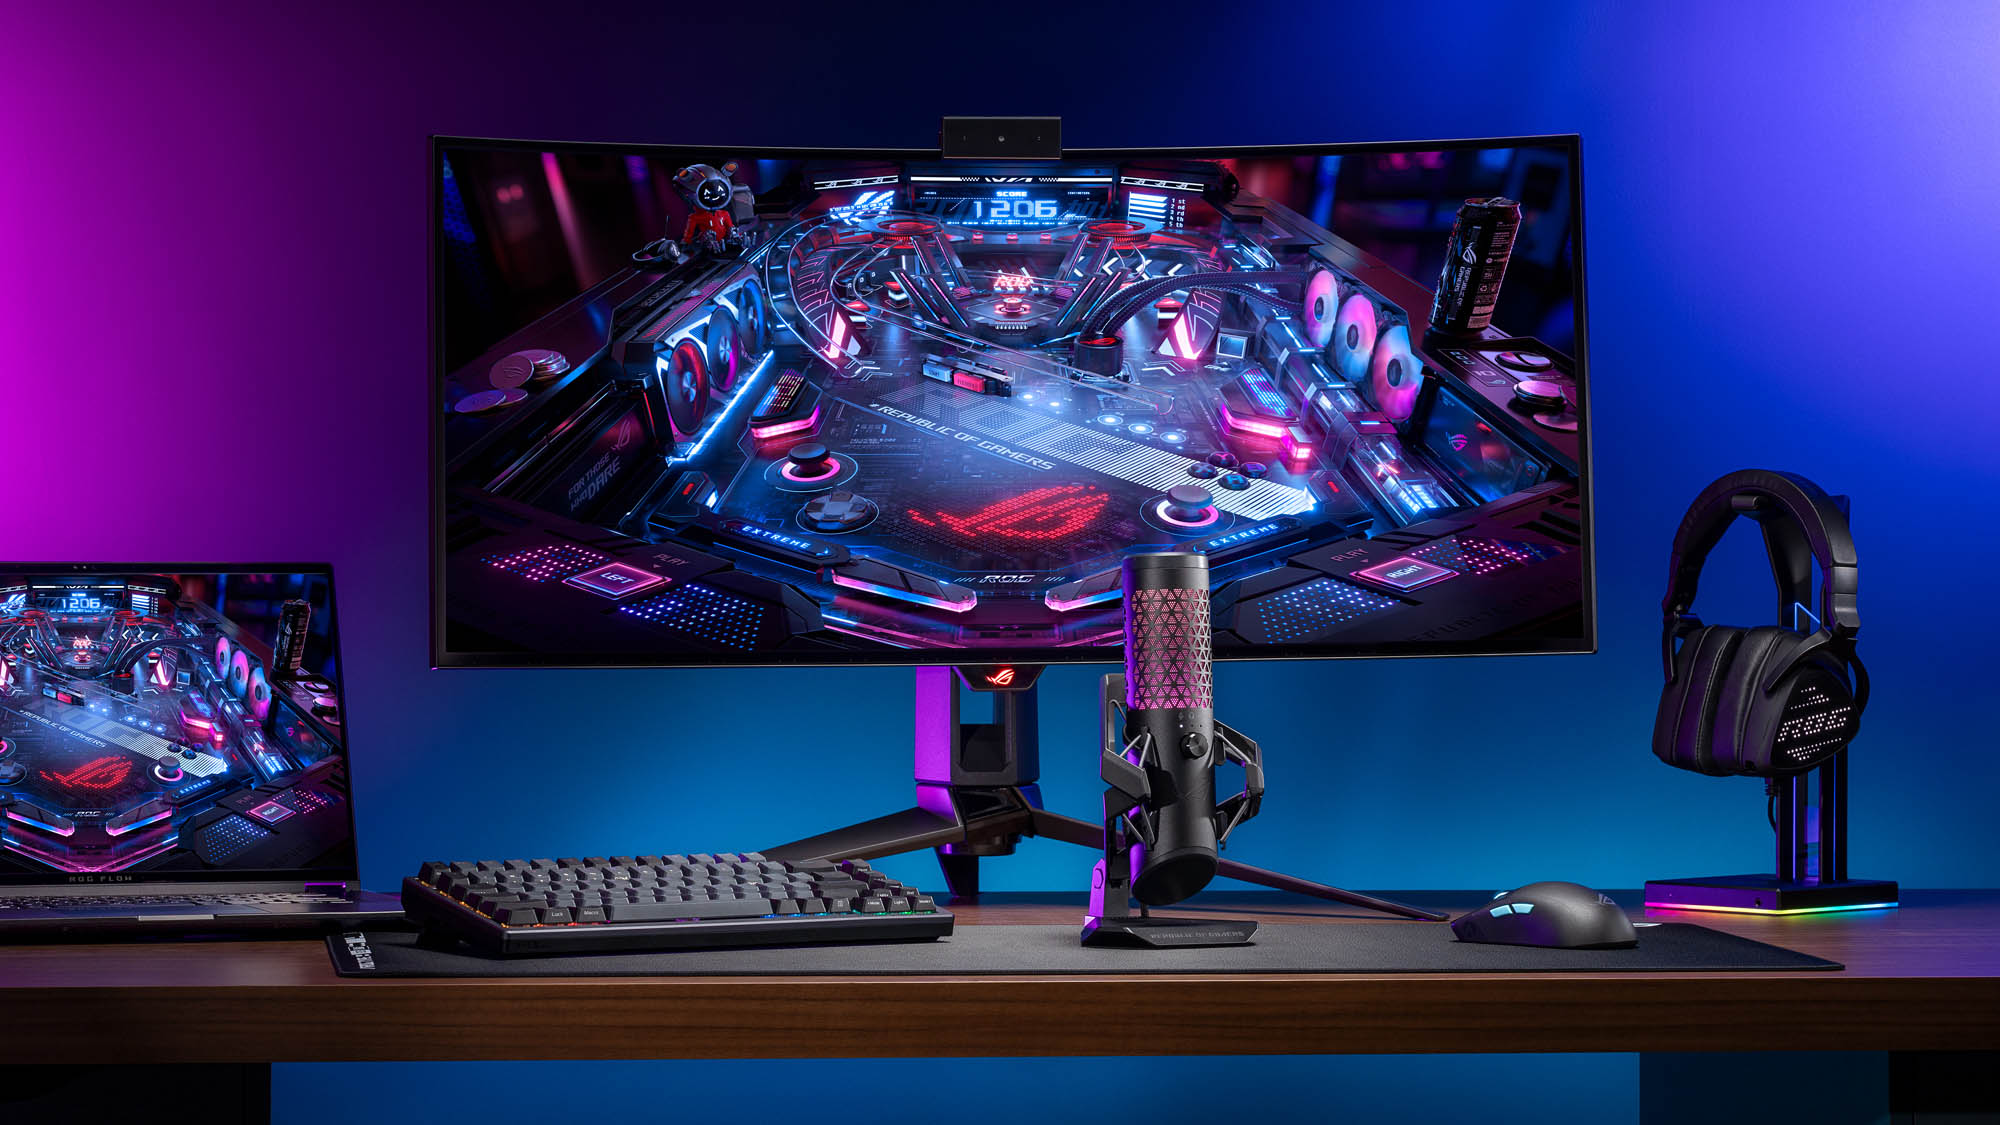 The ROG Carnyx microphone sitting on a desk in front of a gaming monitor, laptop, and headset.